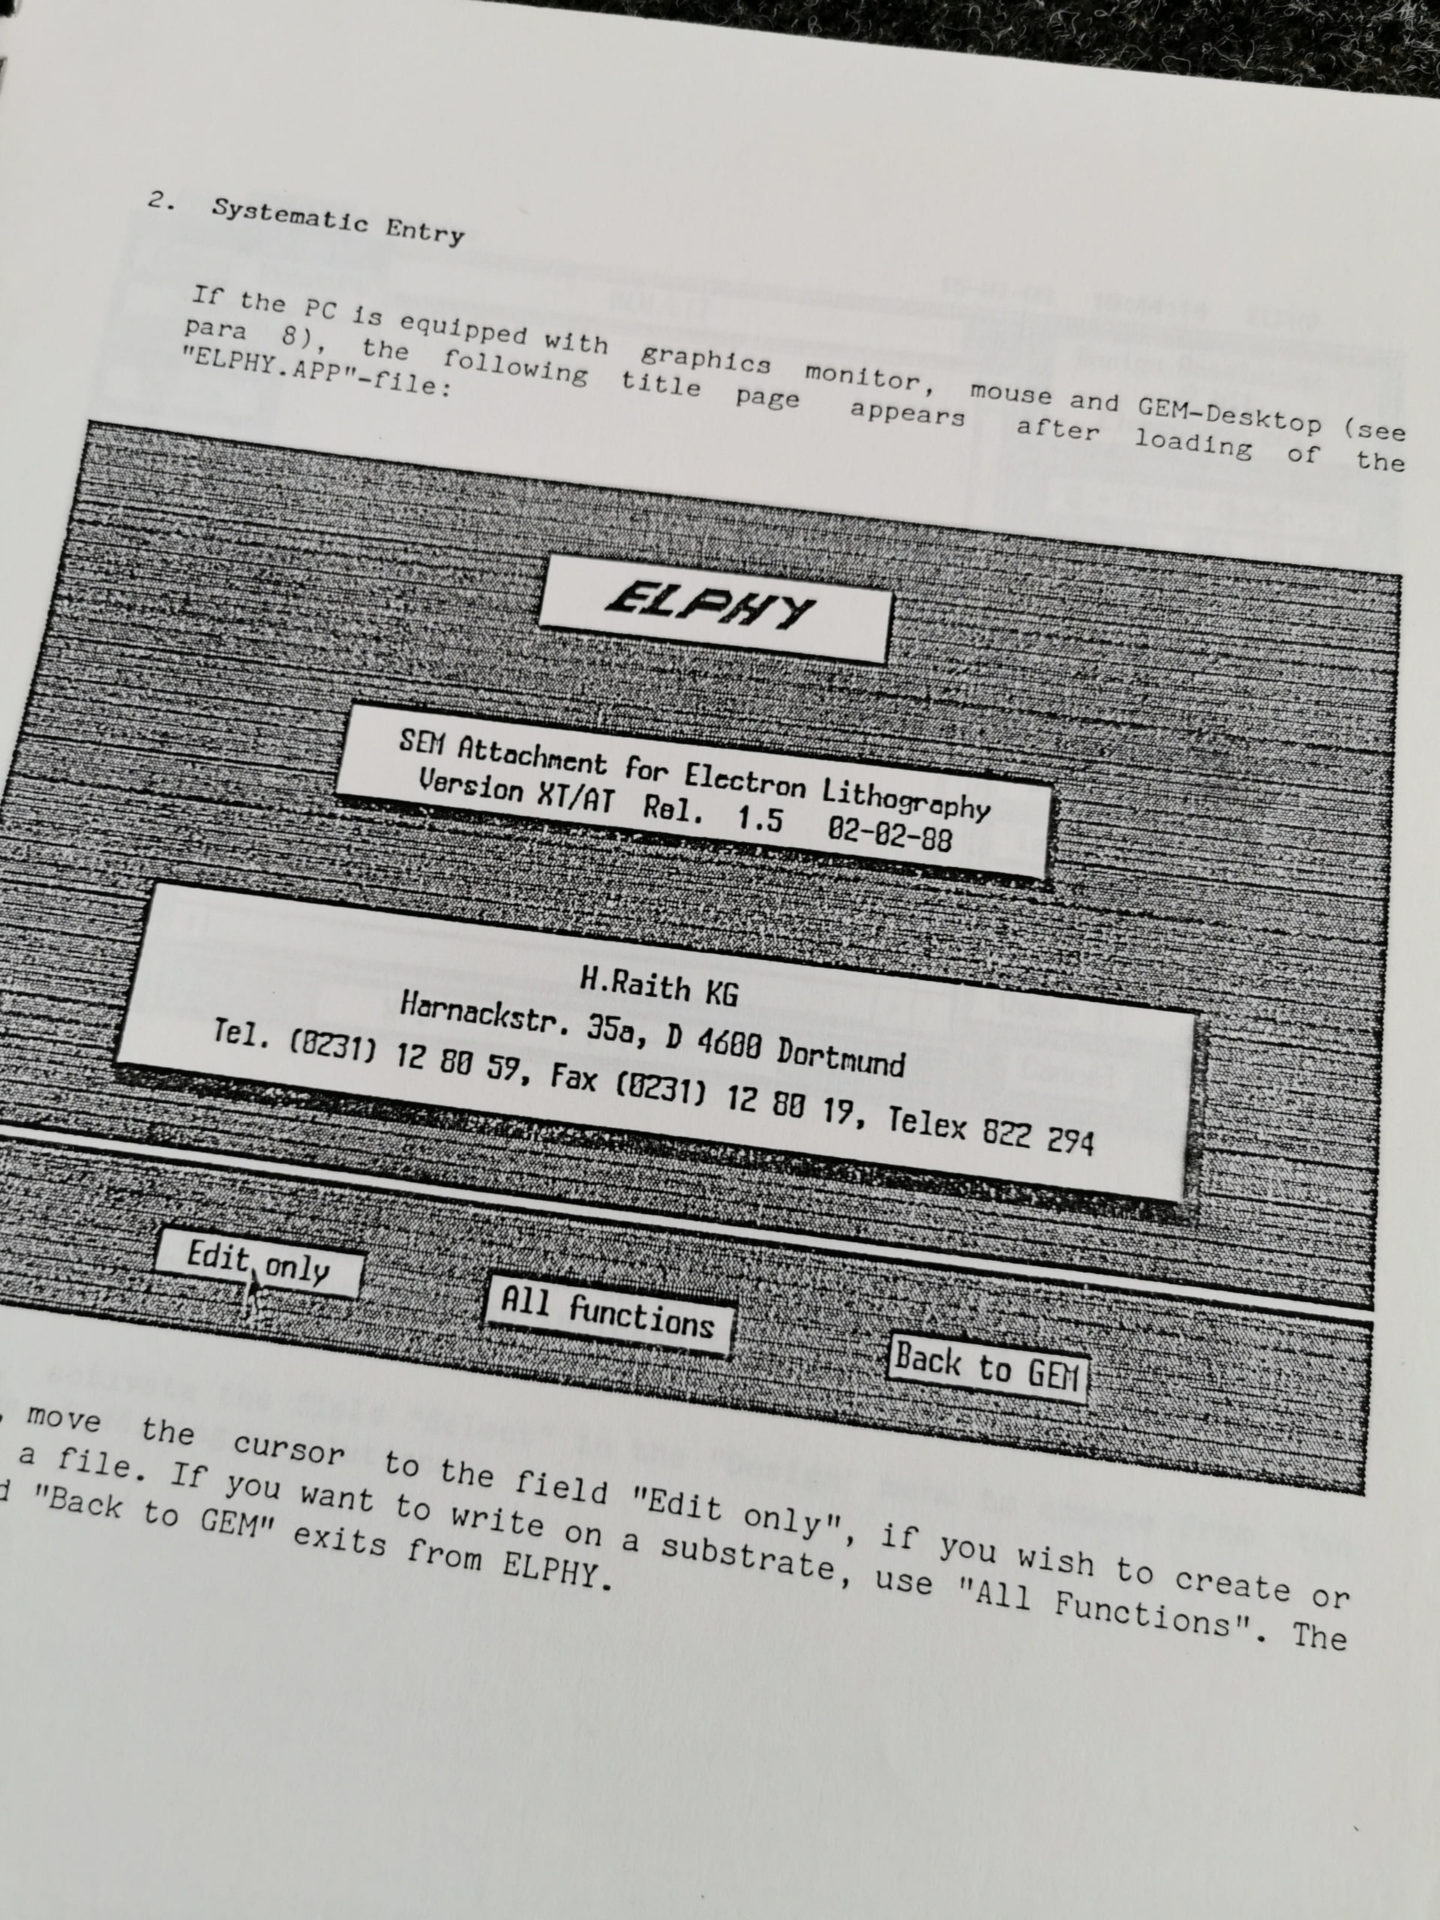 Photo of the first ELPHY manual